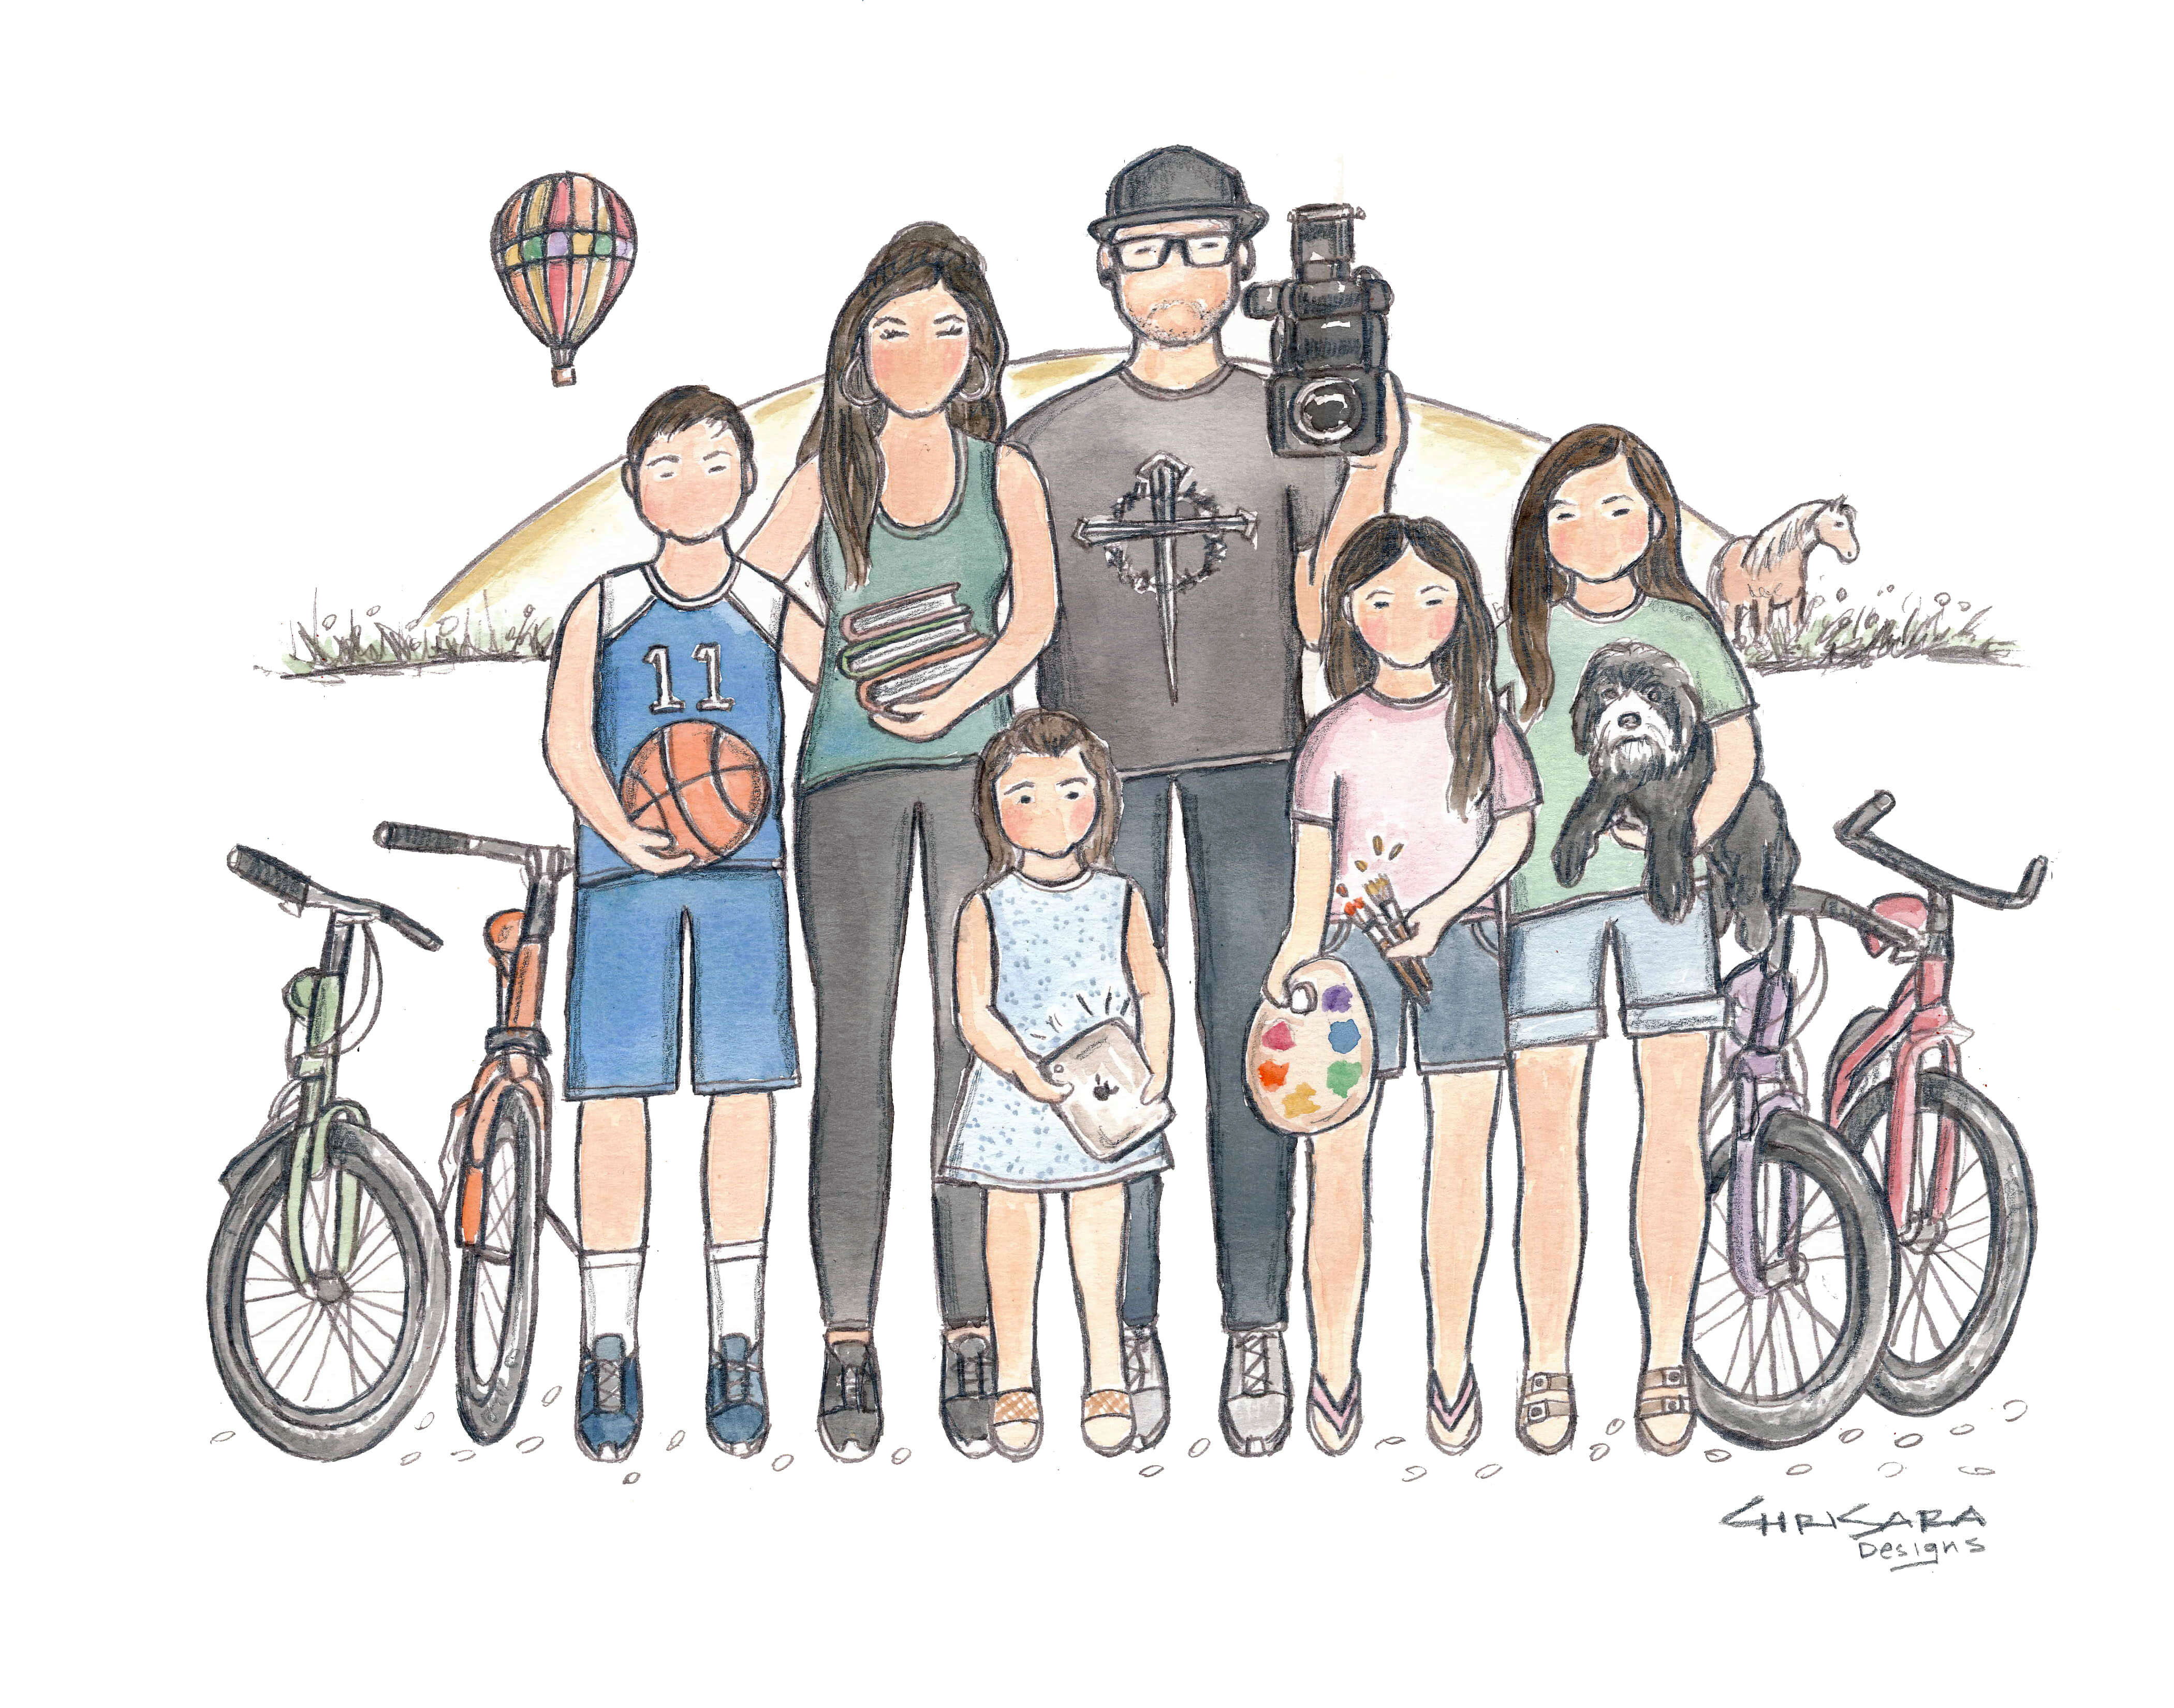 Papa Family Illustration 8x10inches by Chrisara Designs